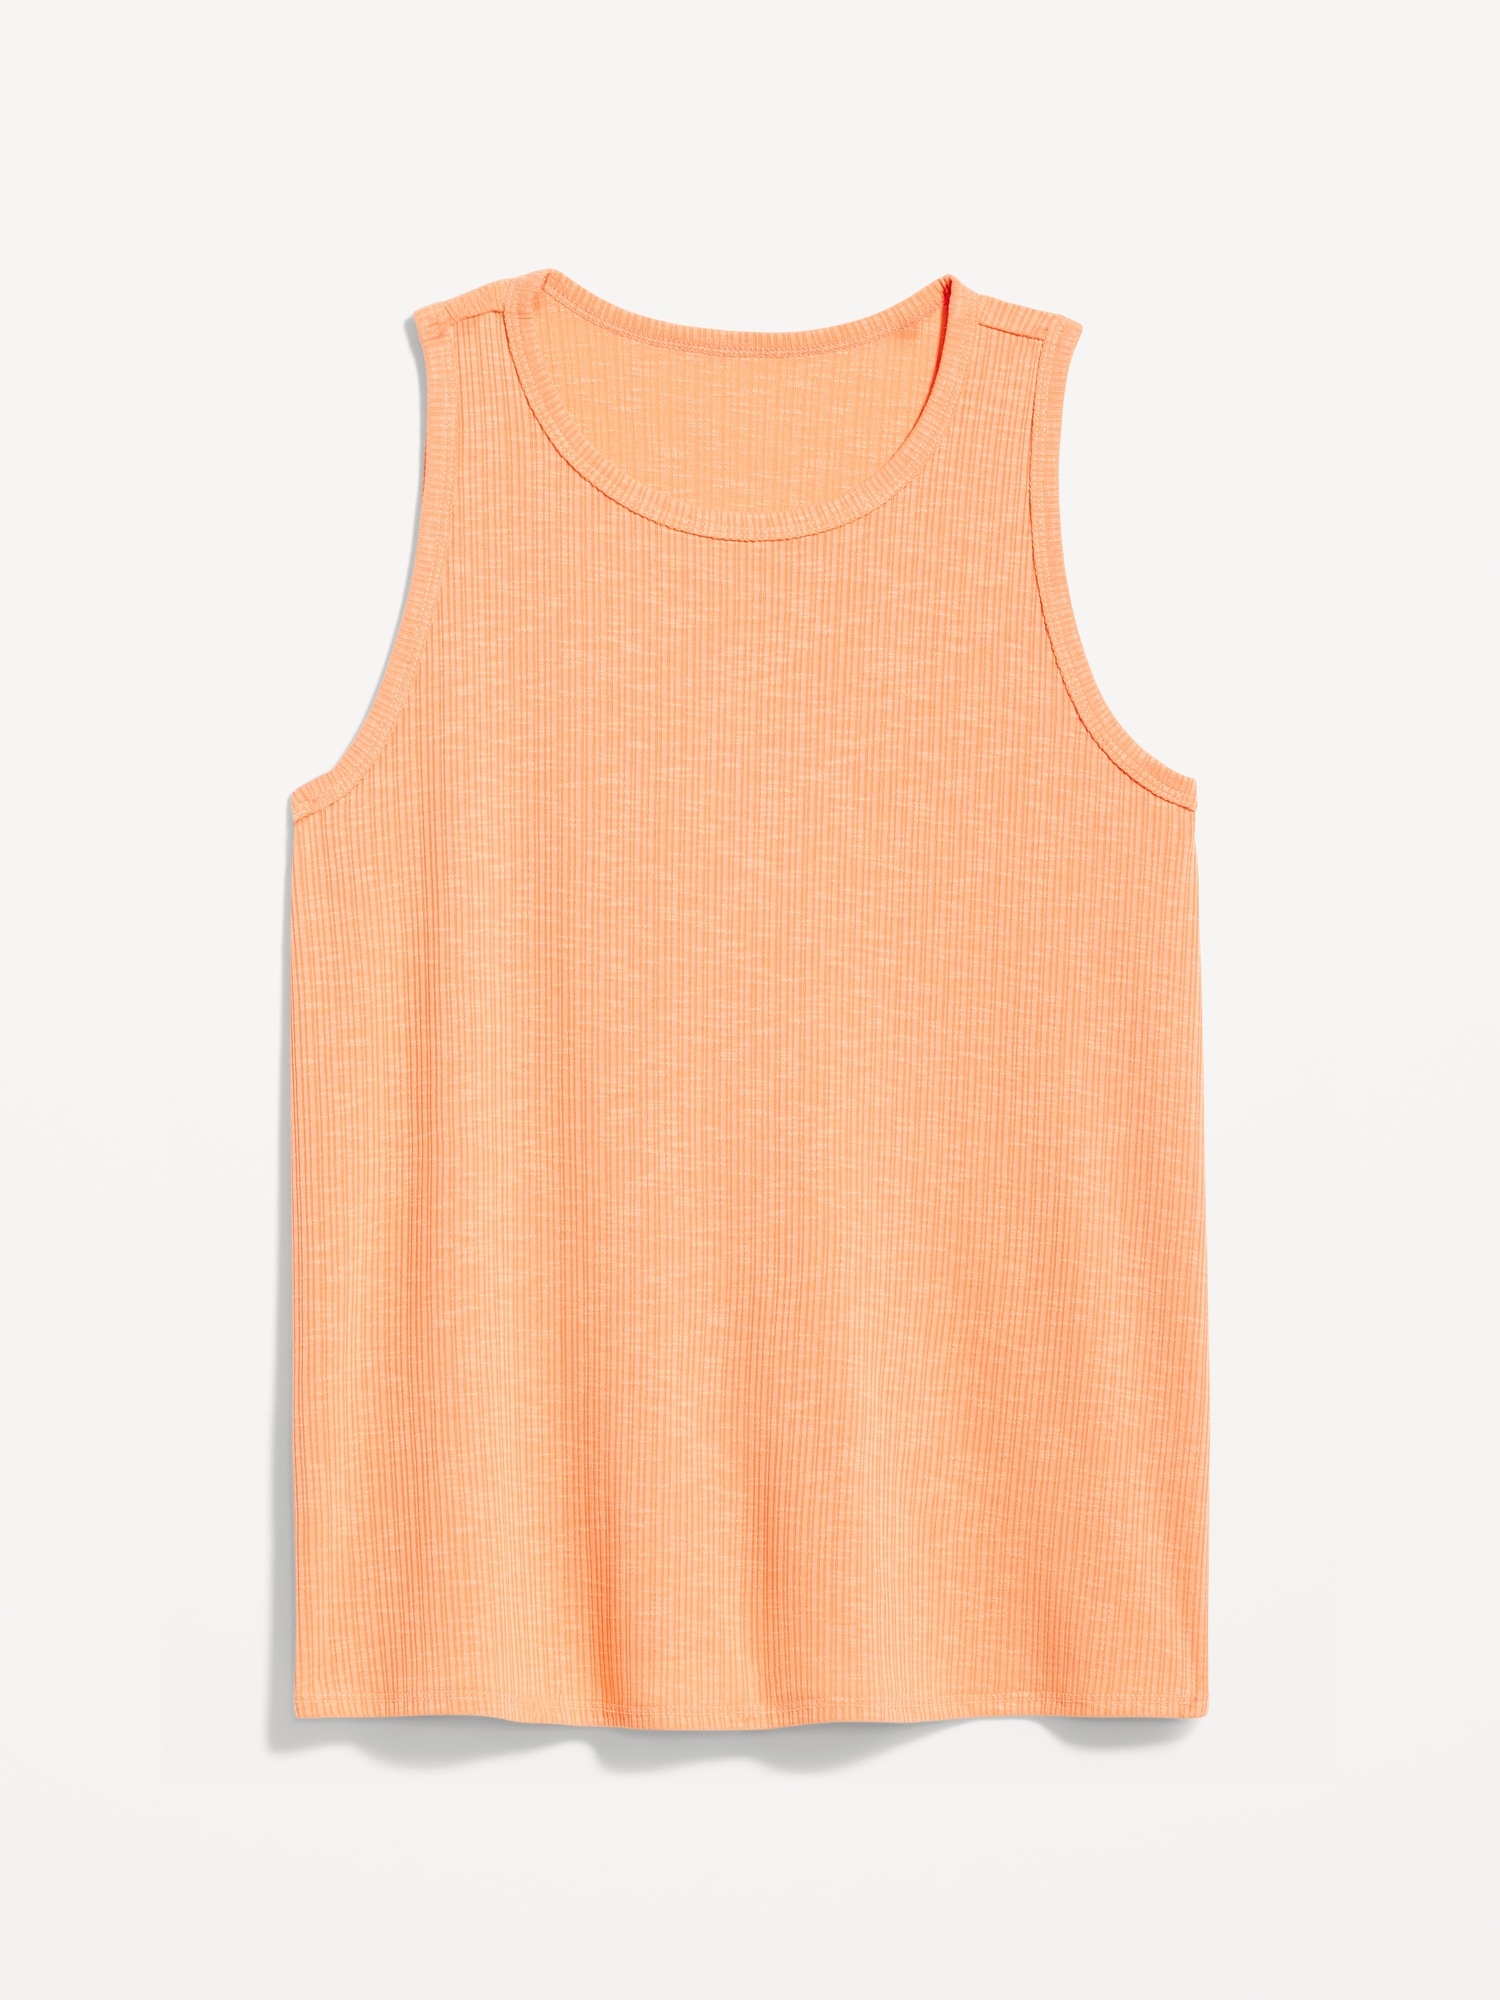 Luxe Sleeveless Top for Women